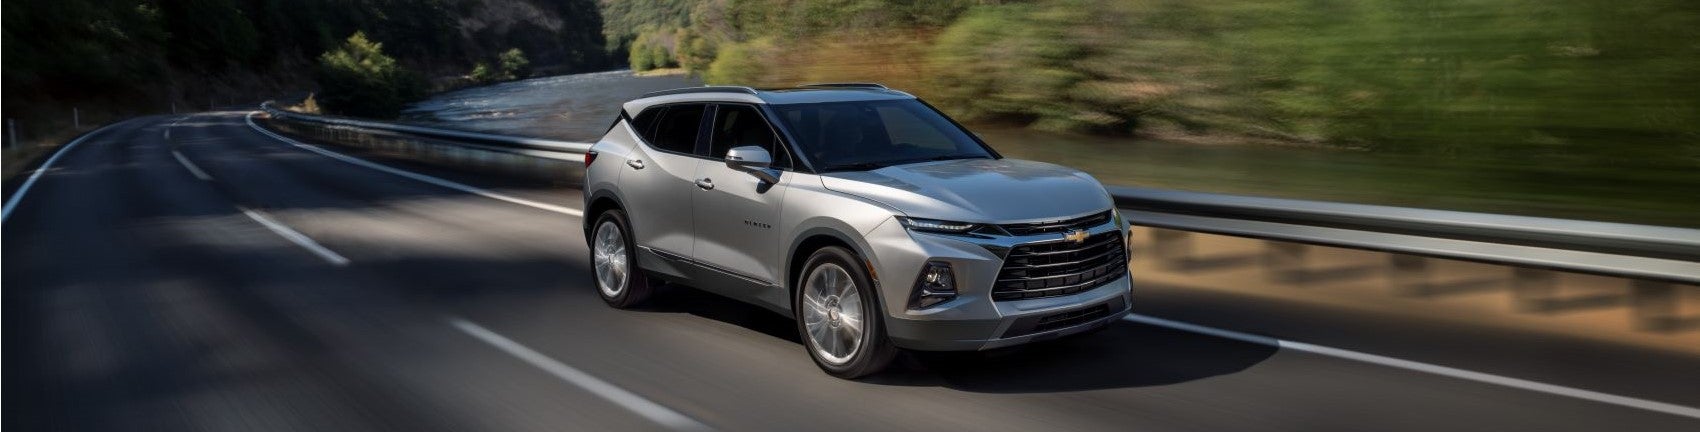 2022 Chevy Blazer in Mountains Snipped